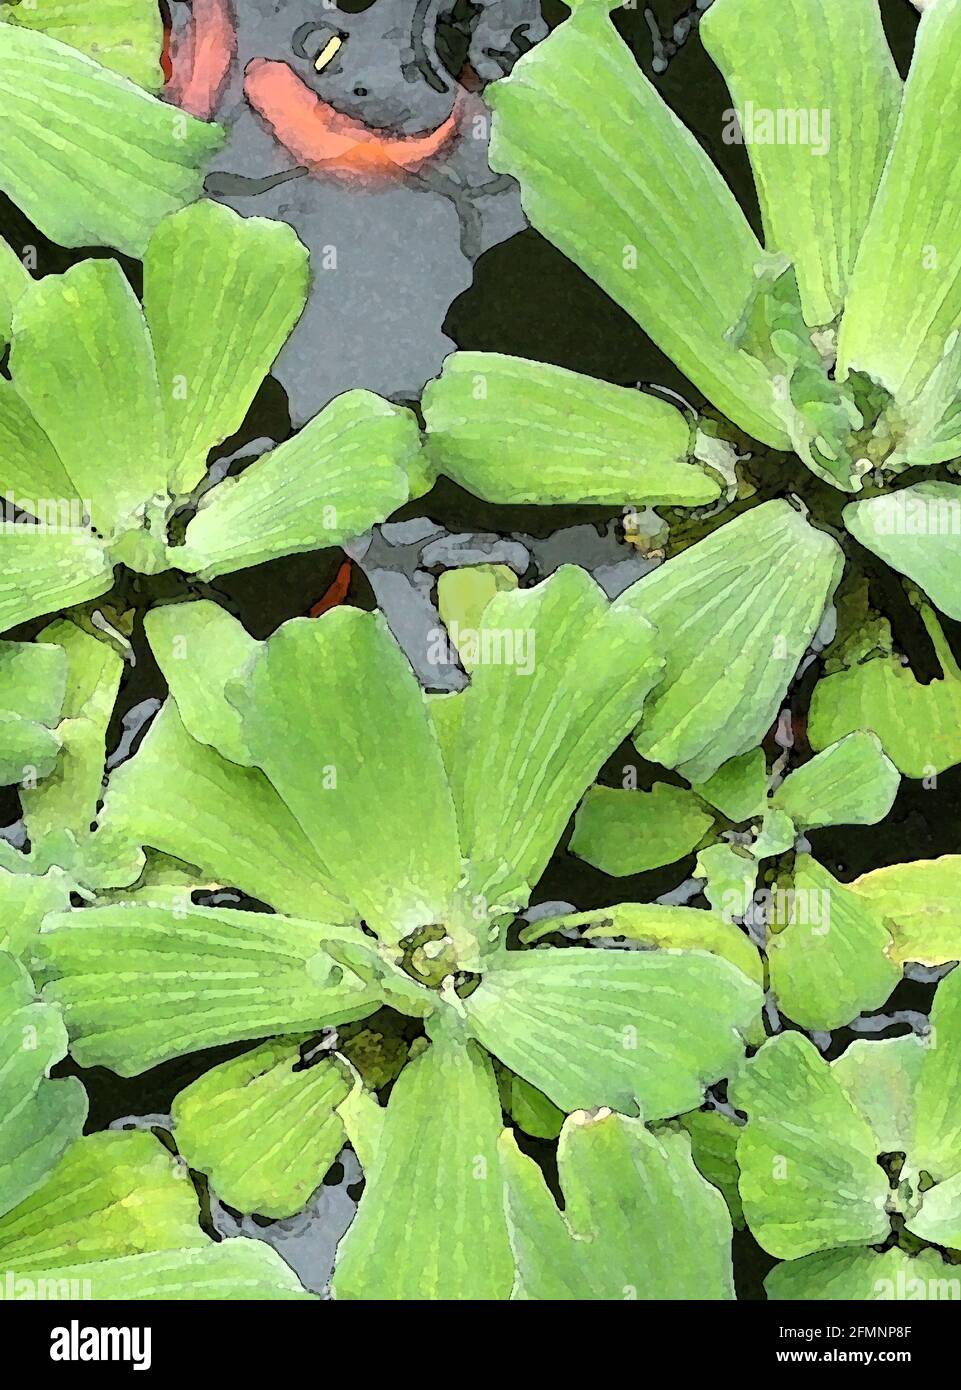 Pistia With Goldfish (Pistia stratiotes) One of Forty-two Iconic Images of English Garden Flowers, Wildflowers and Rural Landscapes. Stock Photo